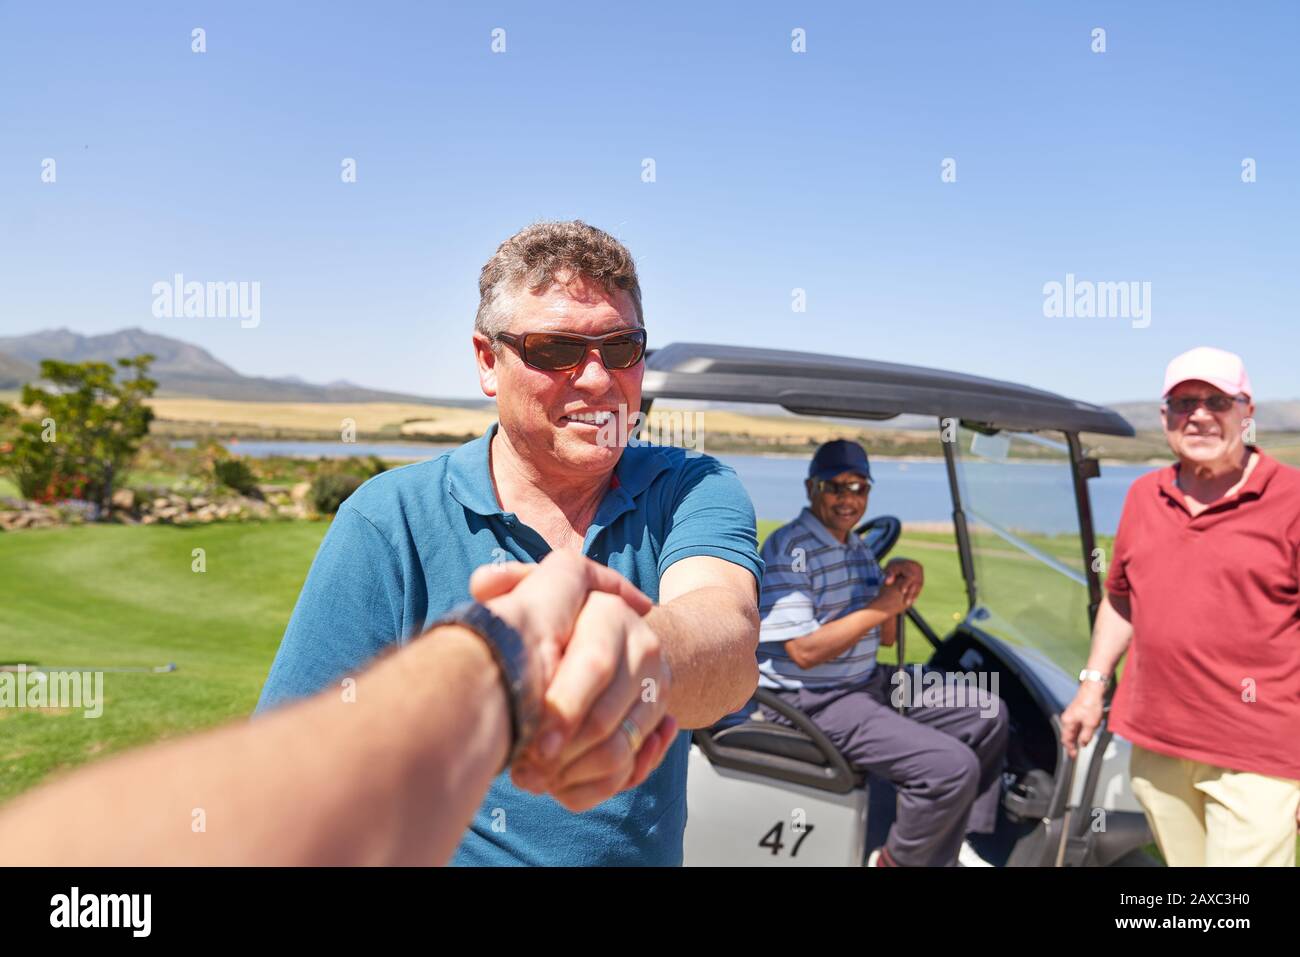 Personal perspective male golfers handshaking on sunny golf course Stock Photo